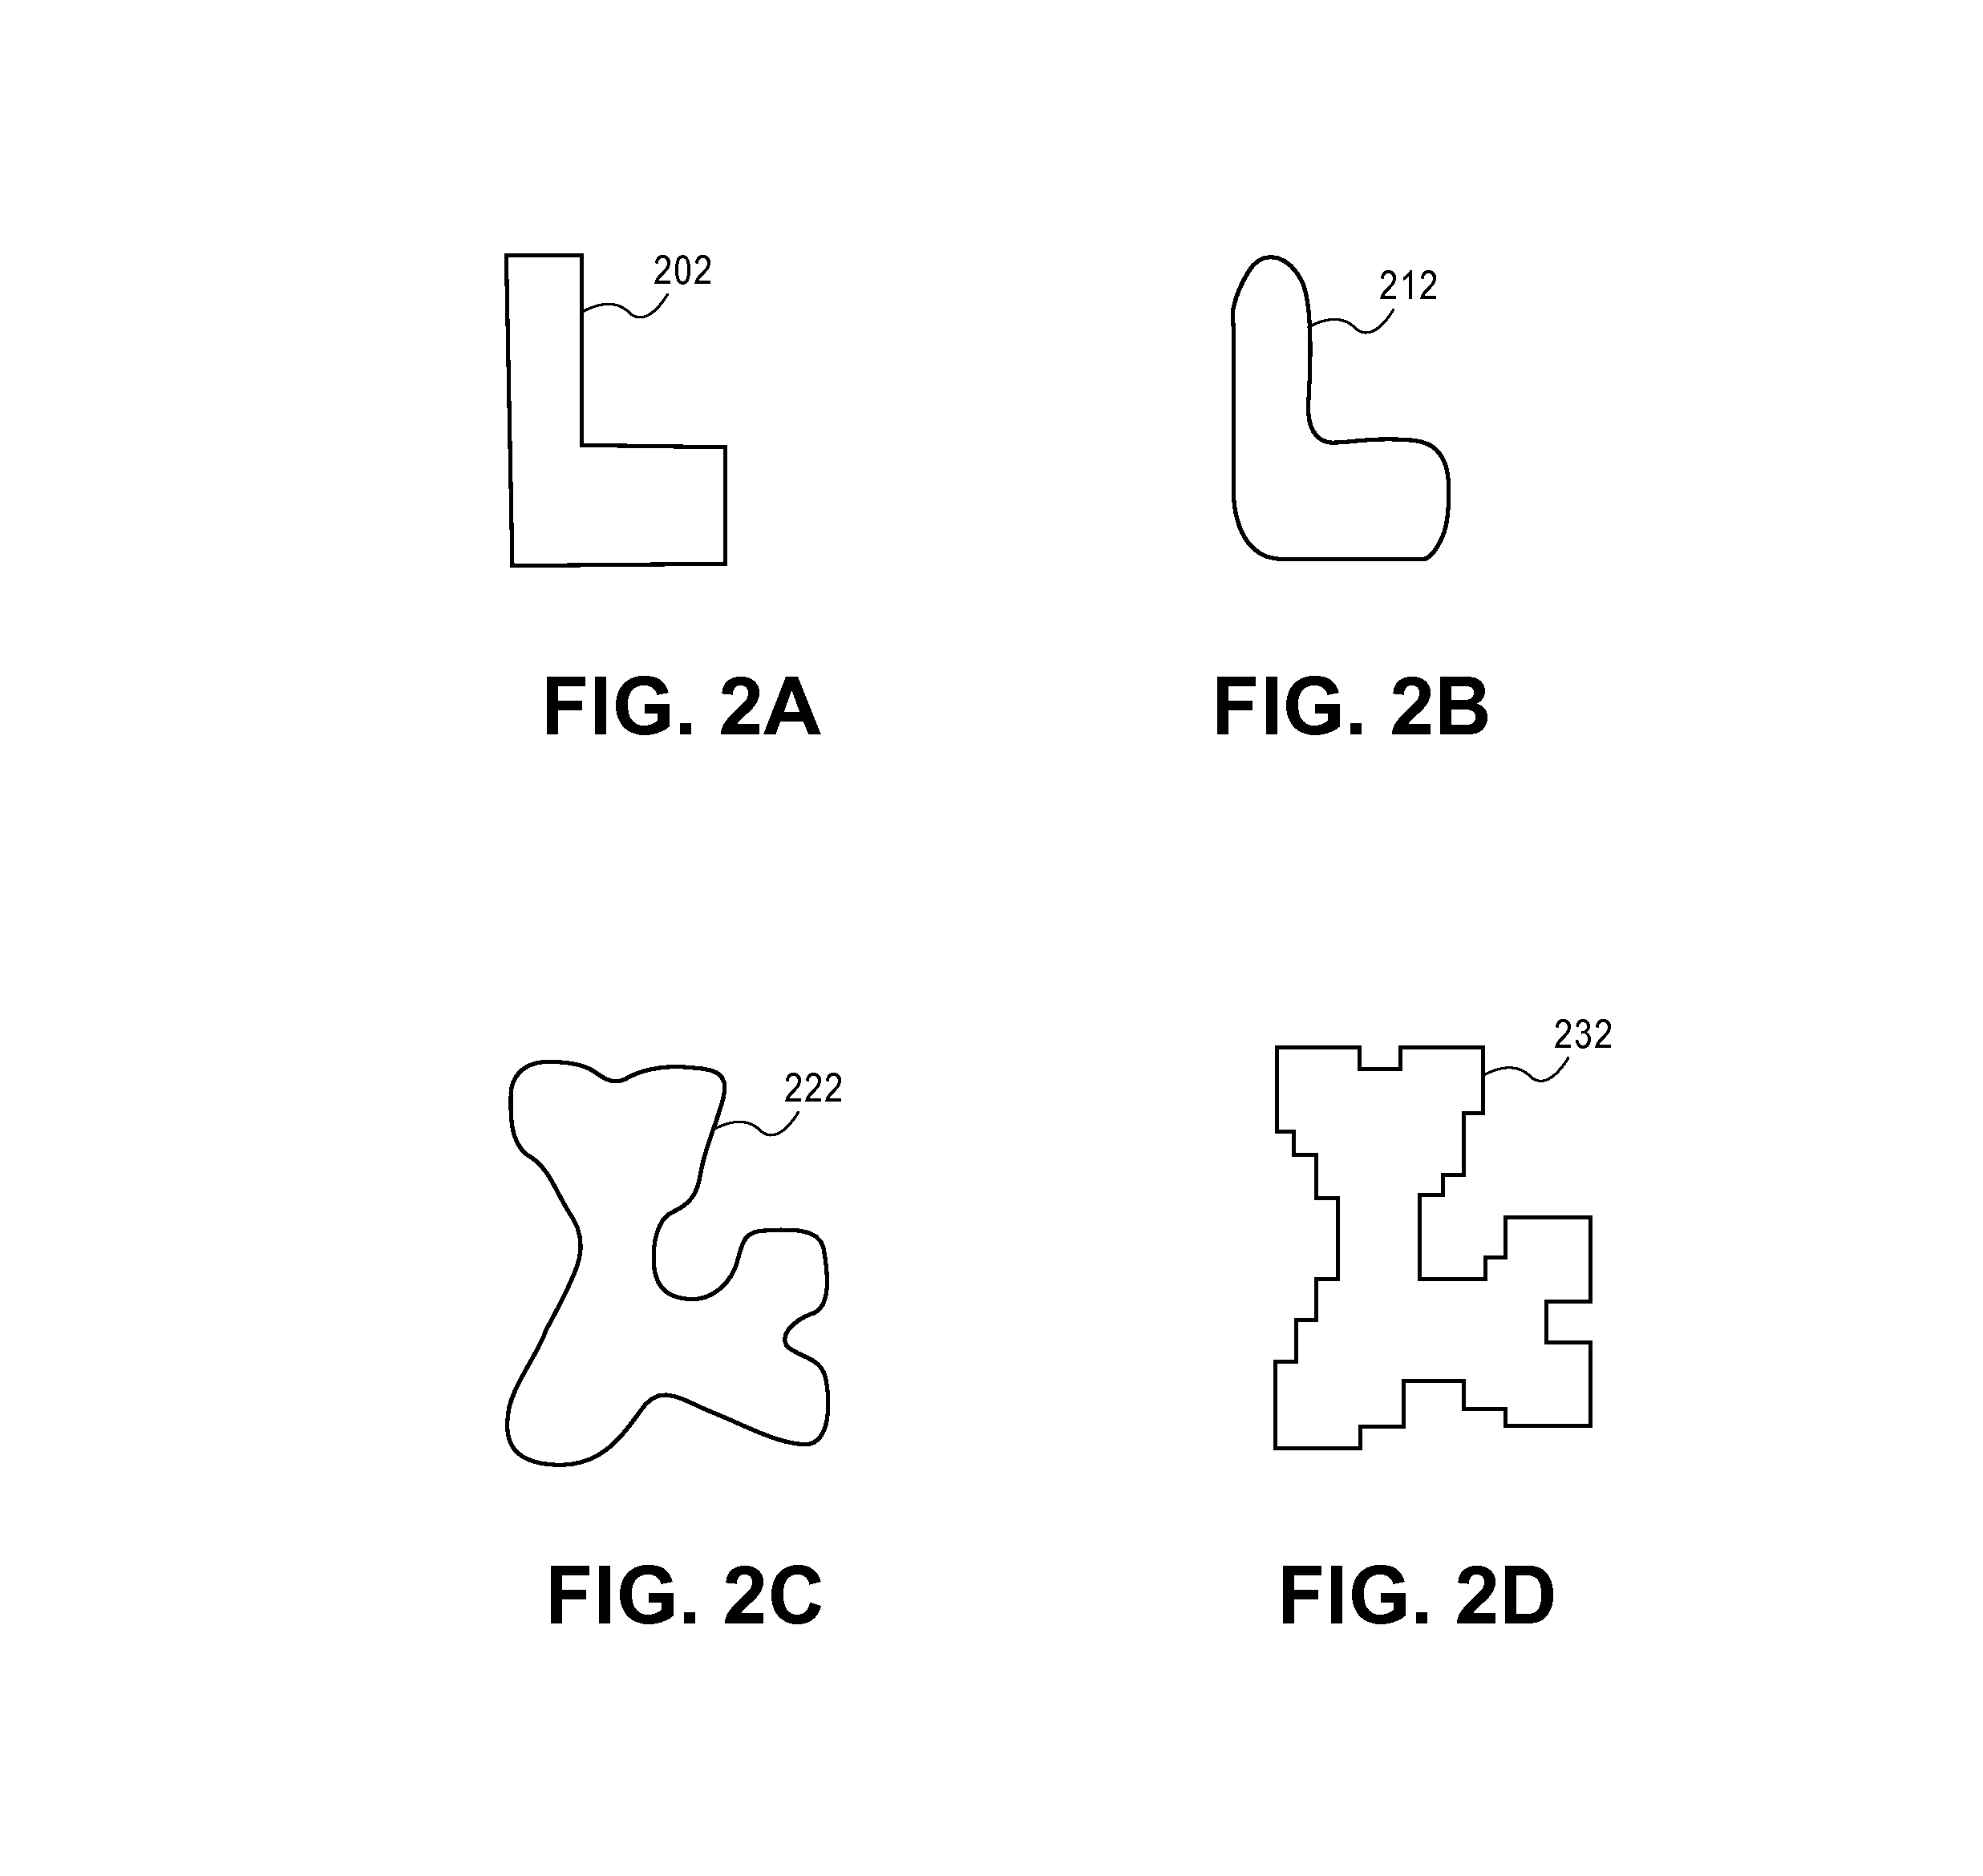 Method and System for Optimization of an Image on a Substrate to be Manufactured Using Optical Lithography